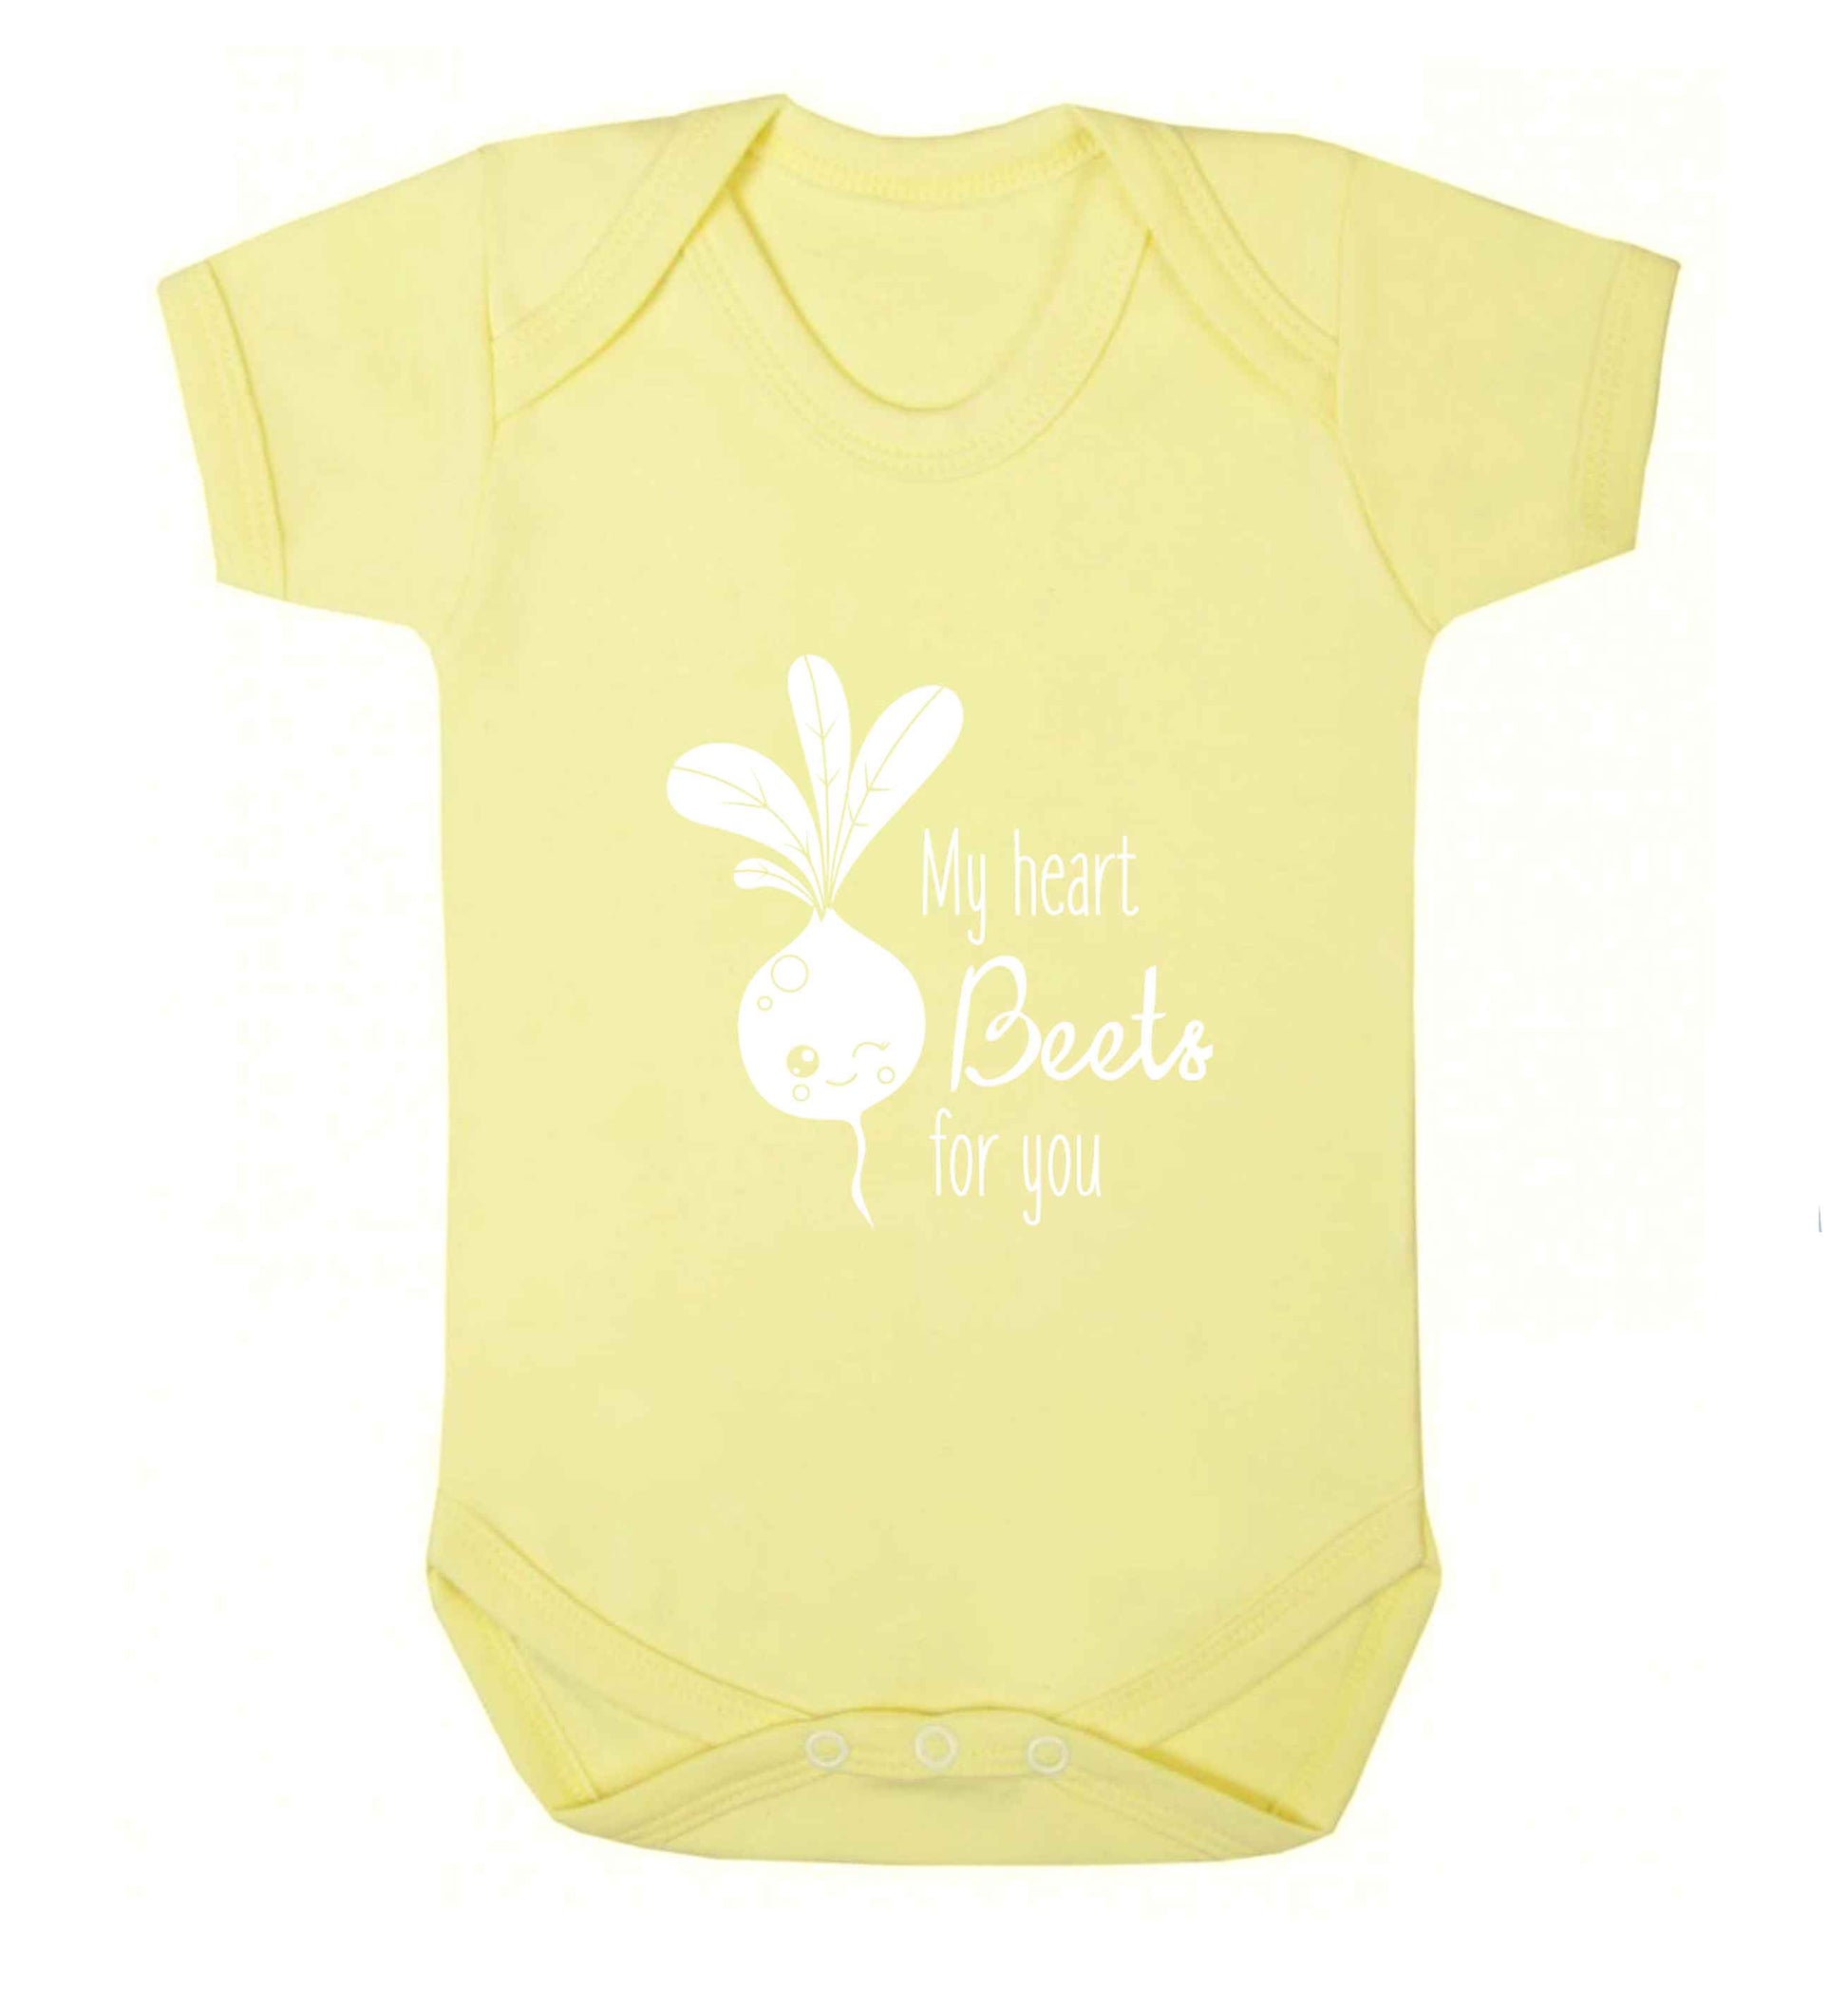 My heart beets for you baby vest pale yellow 18-24 months